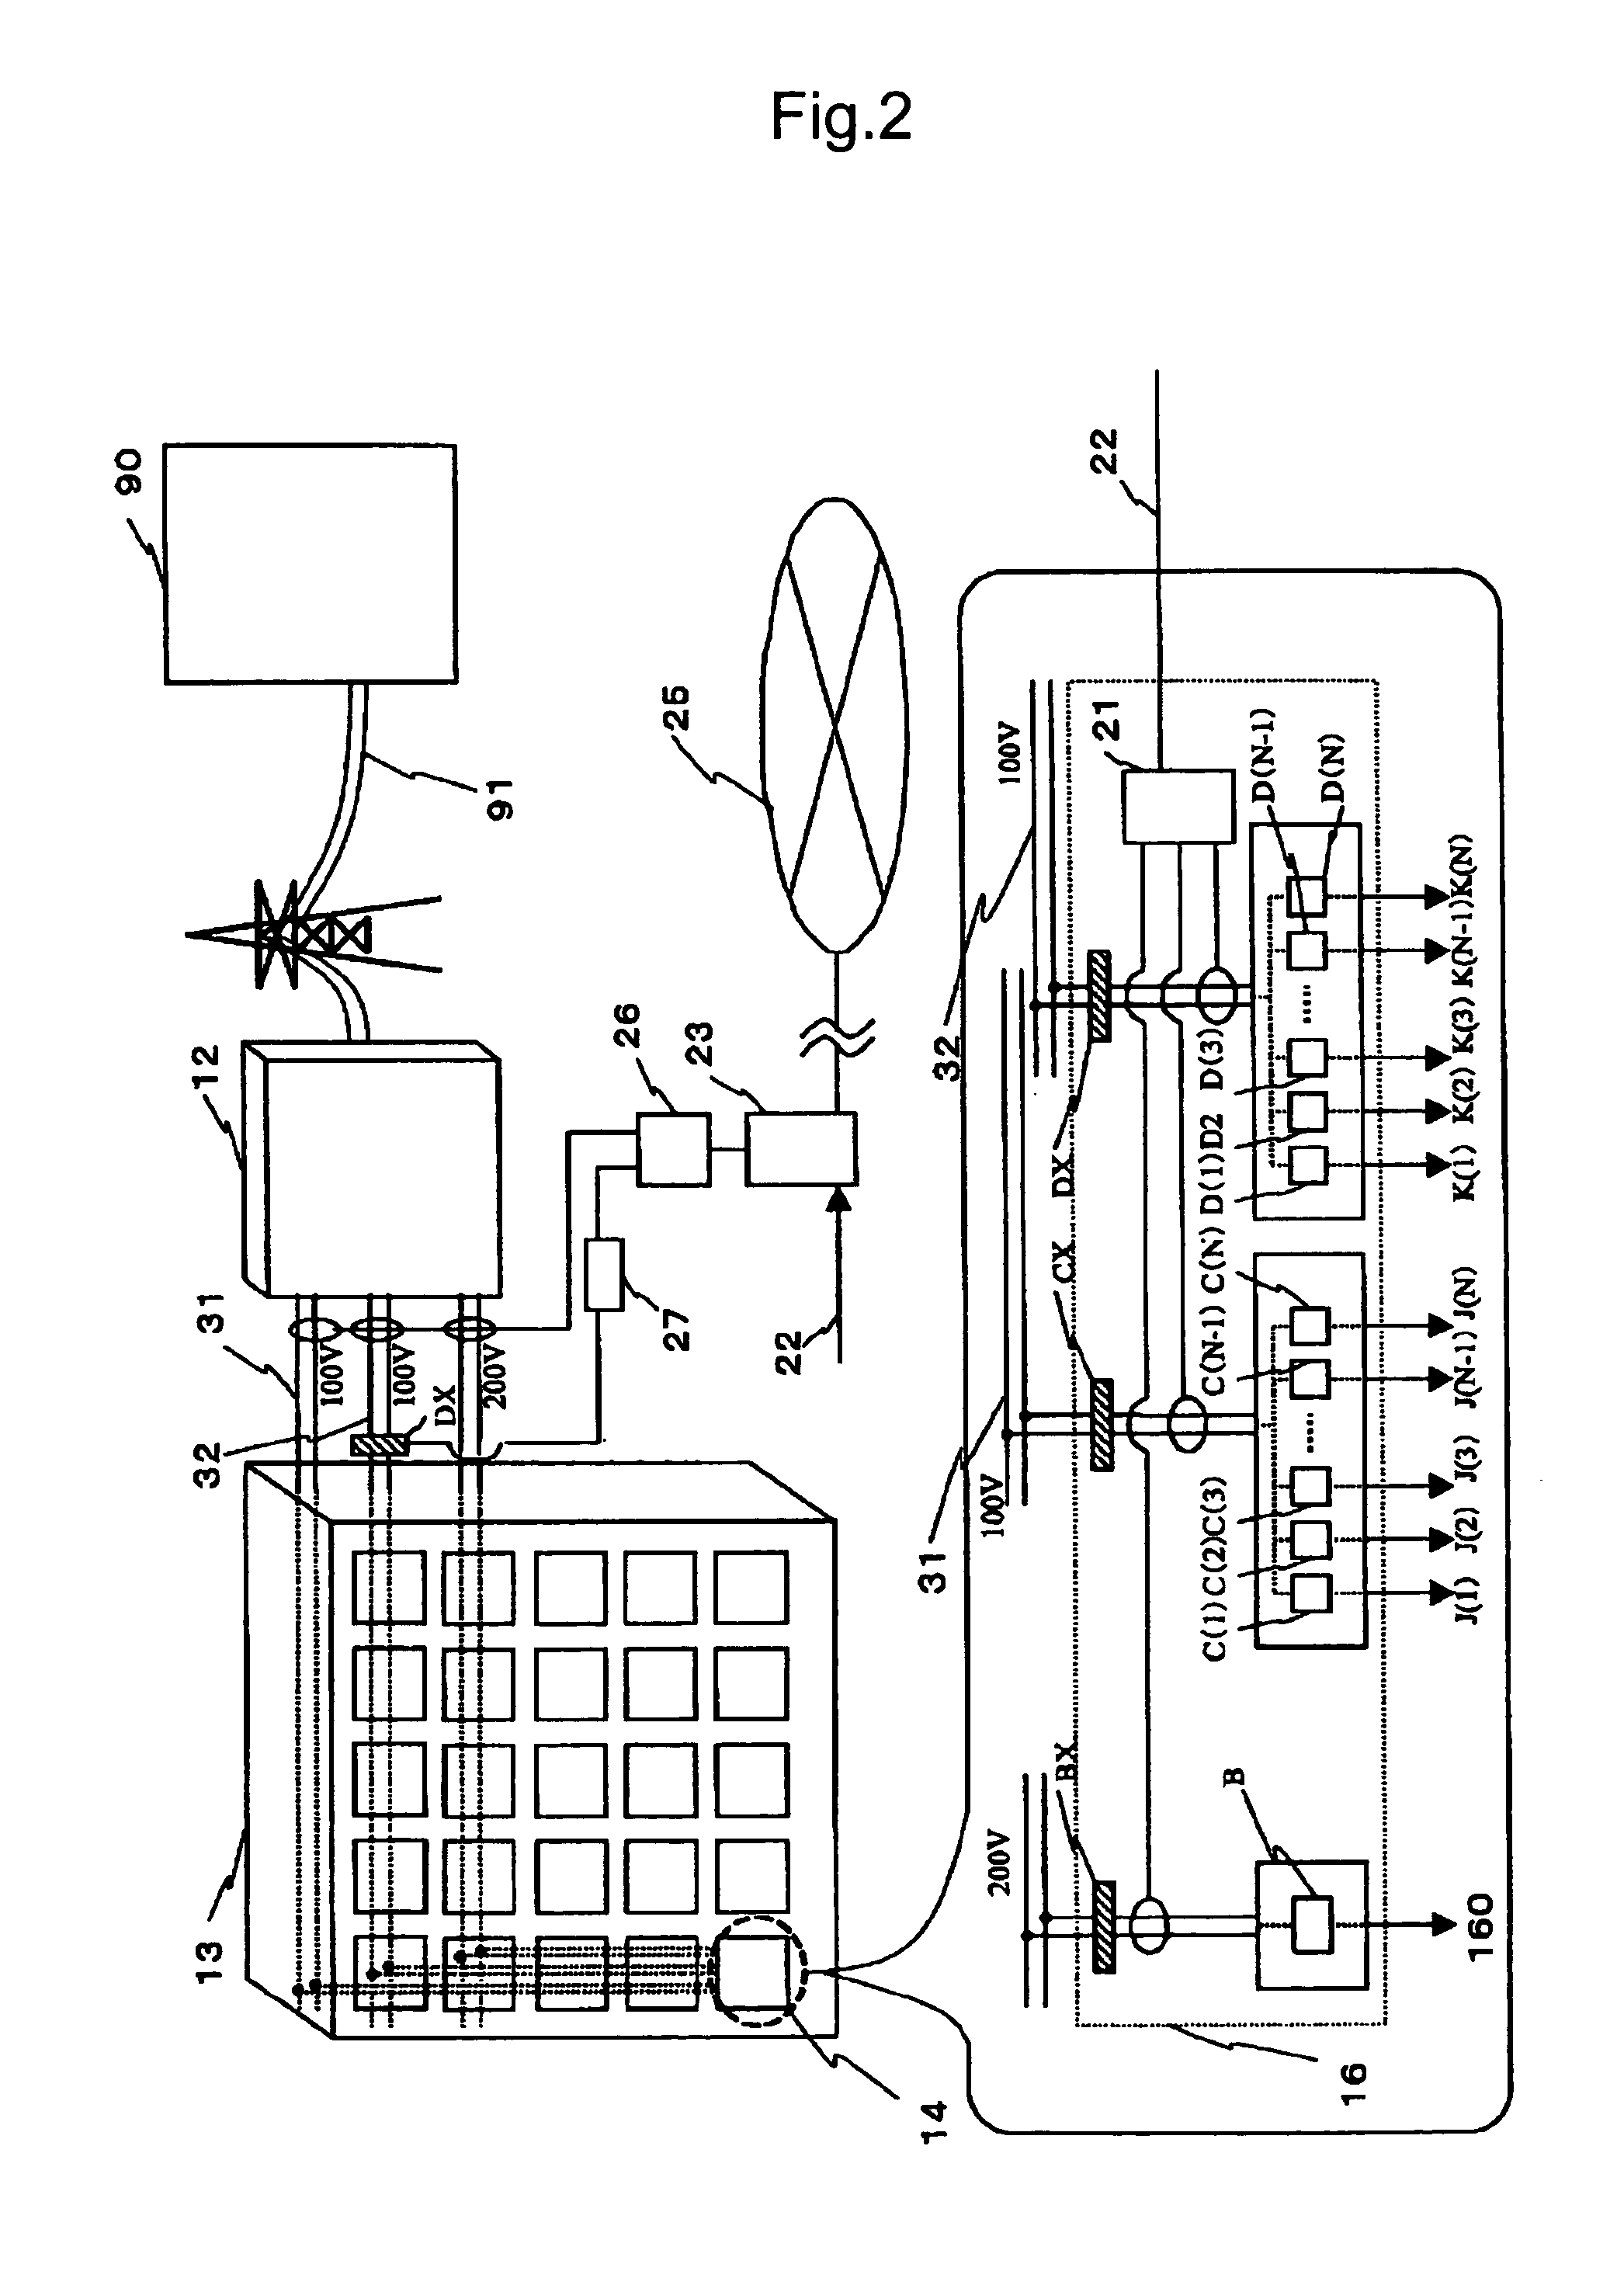 Power system for area containing a set of power consumers